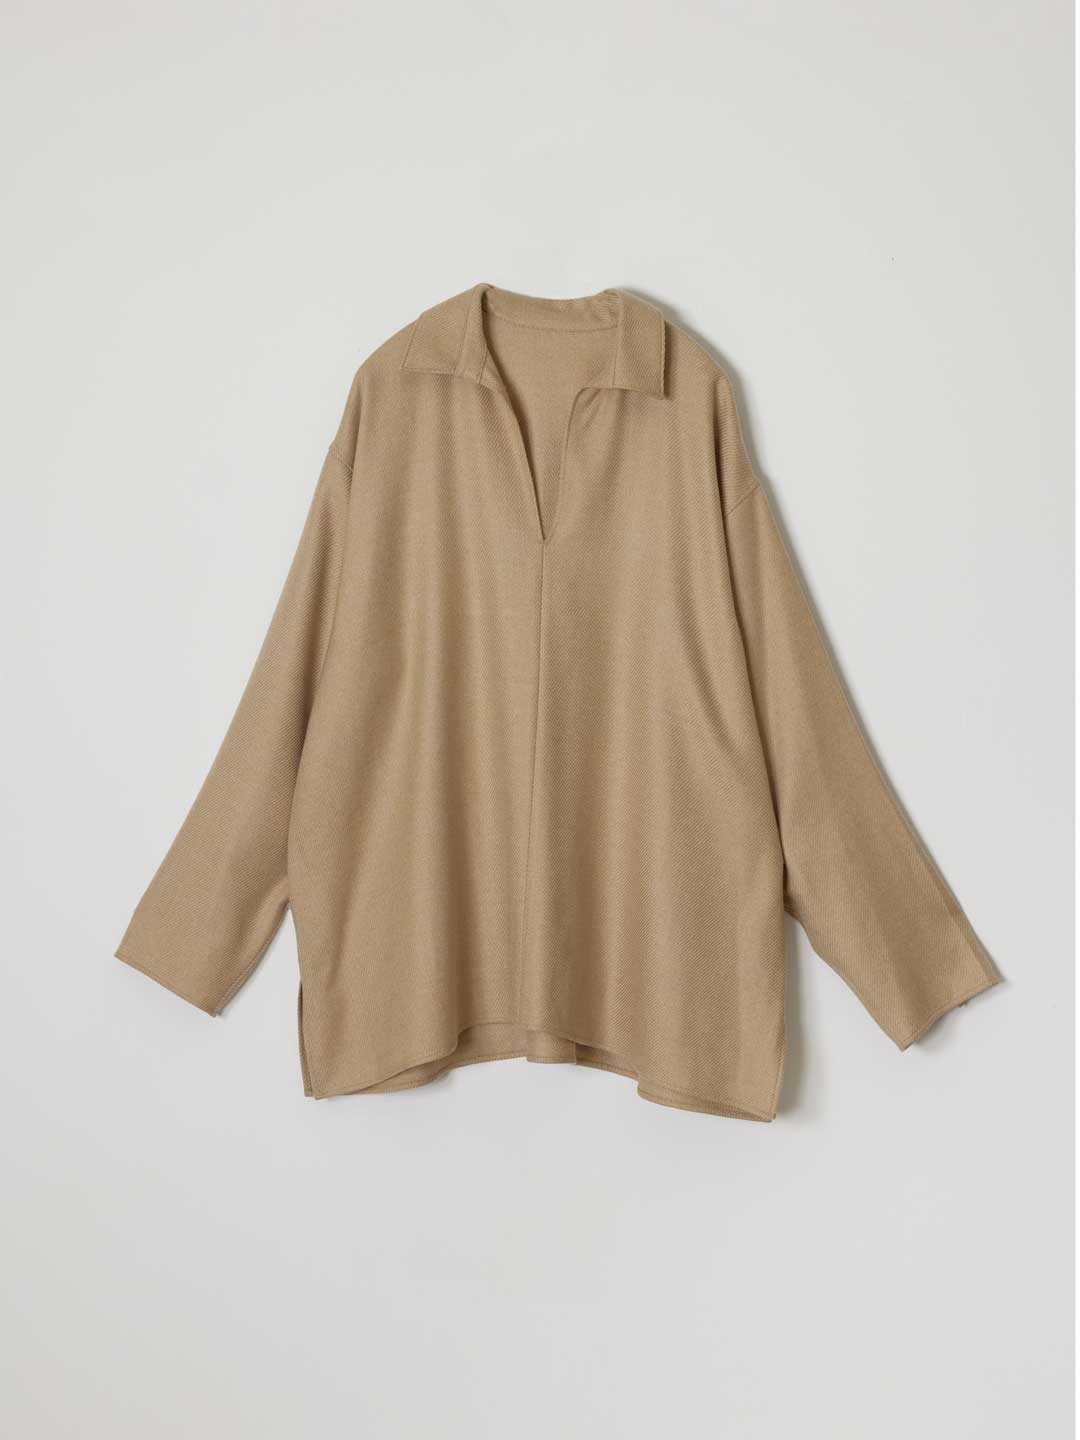 No.0344 Wool Pull-Over Shirt - Camel